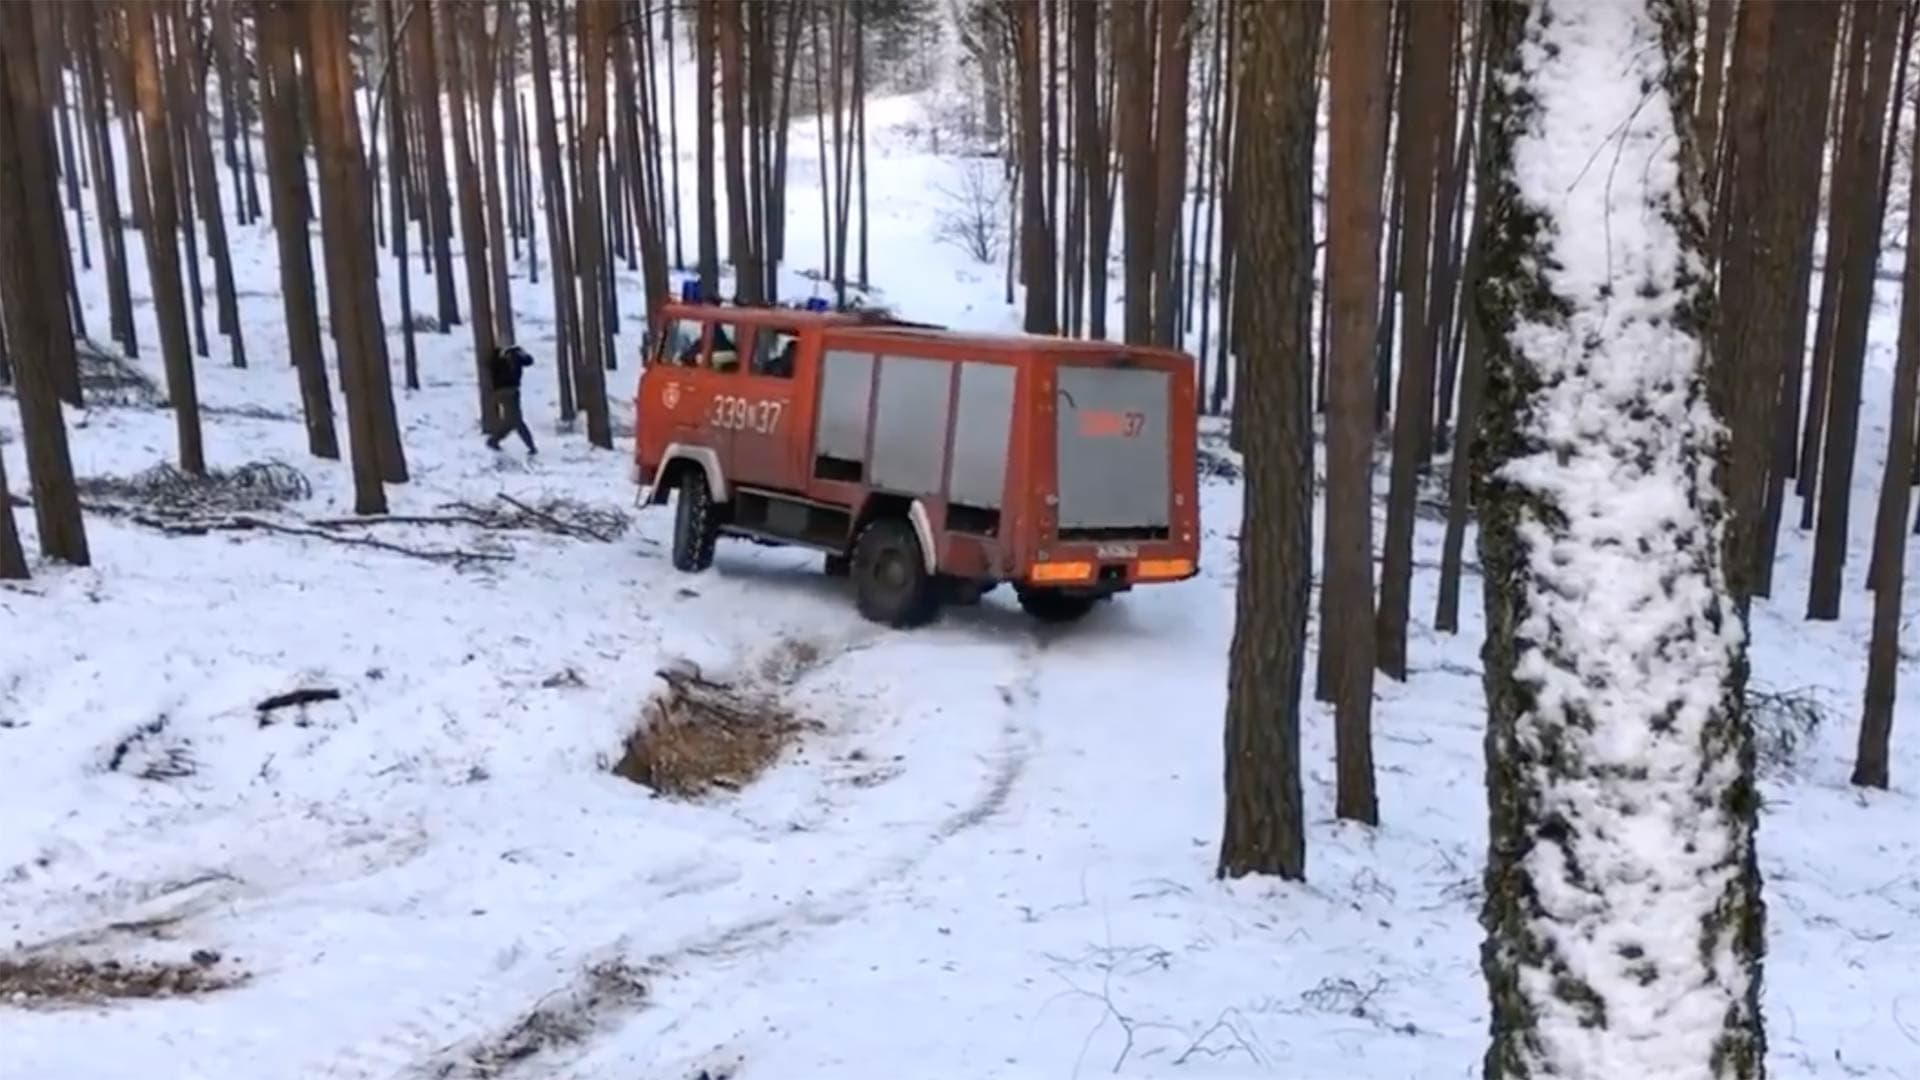 Fire Truck Goes Off-Roading, Miraculously Avoids Crashing